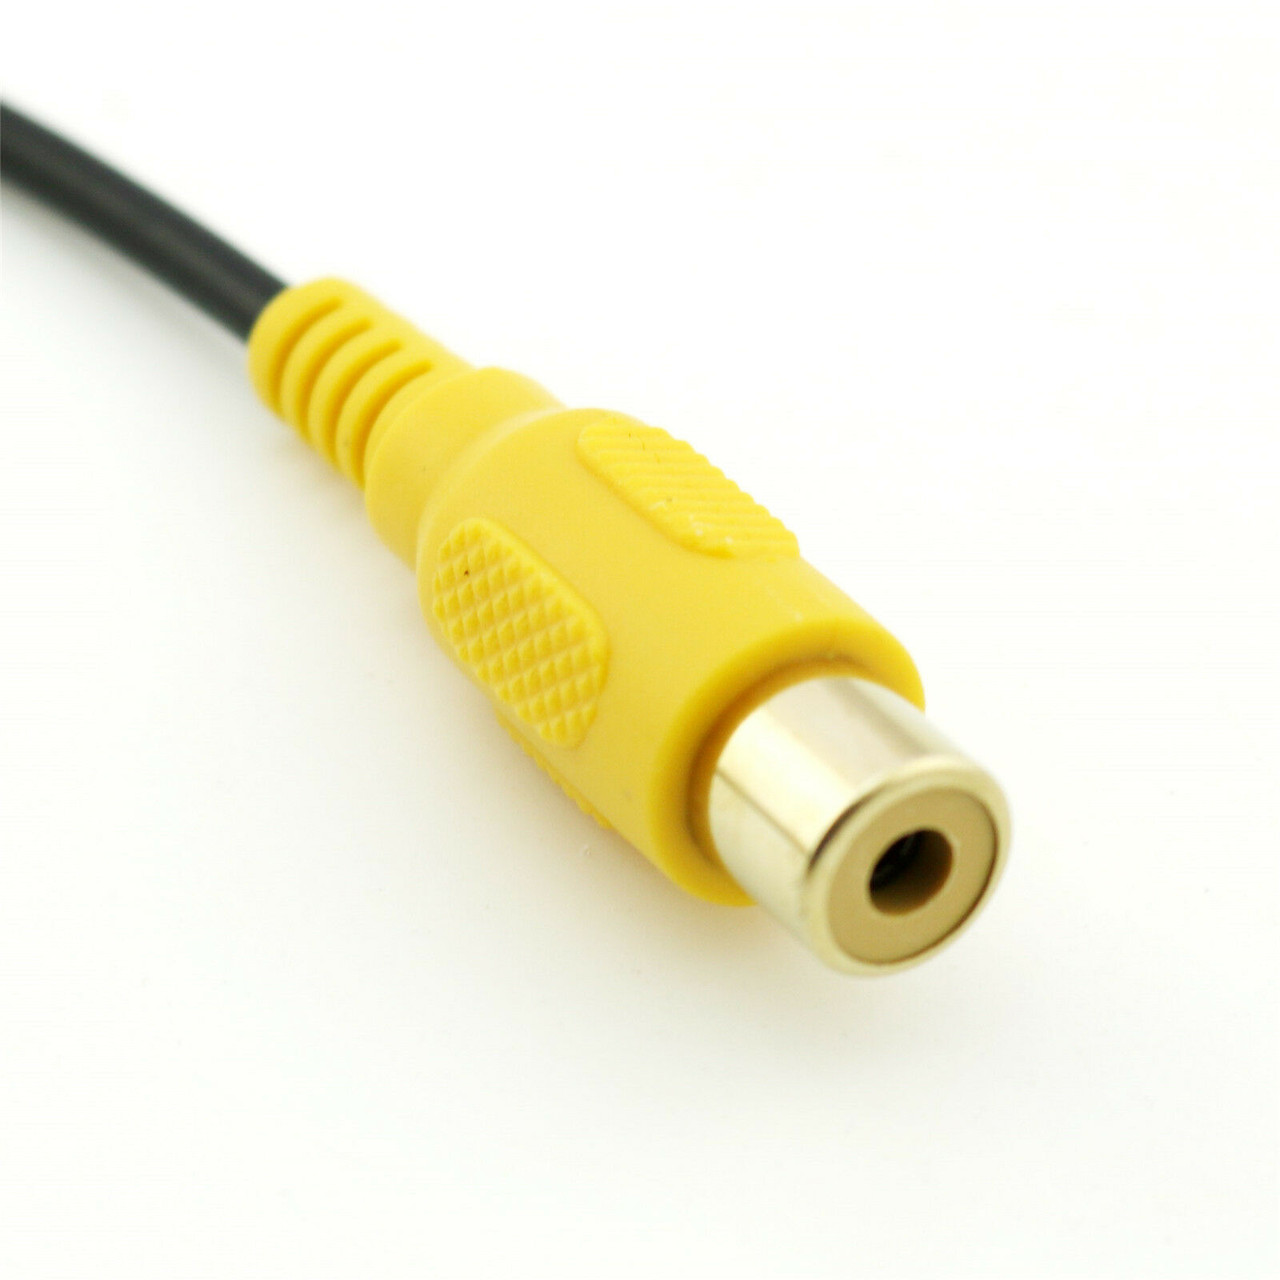 3.5mm Mono Male to RCA Female Cable Audio Video For Car DVR Camcorder Camera Gold Plated Cord 30CM